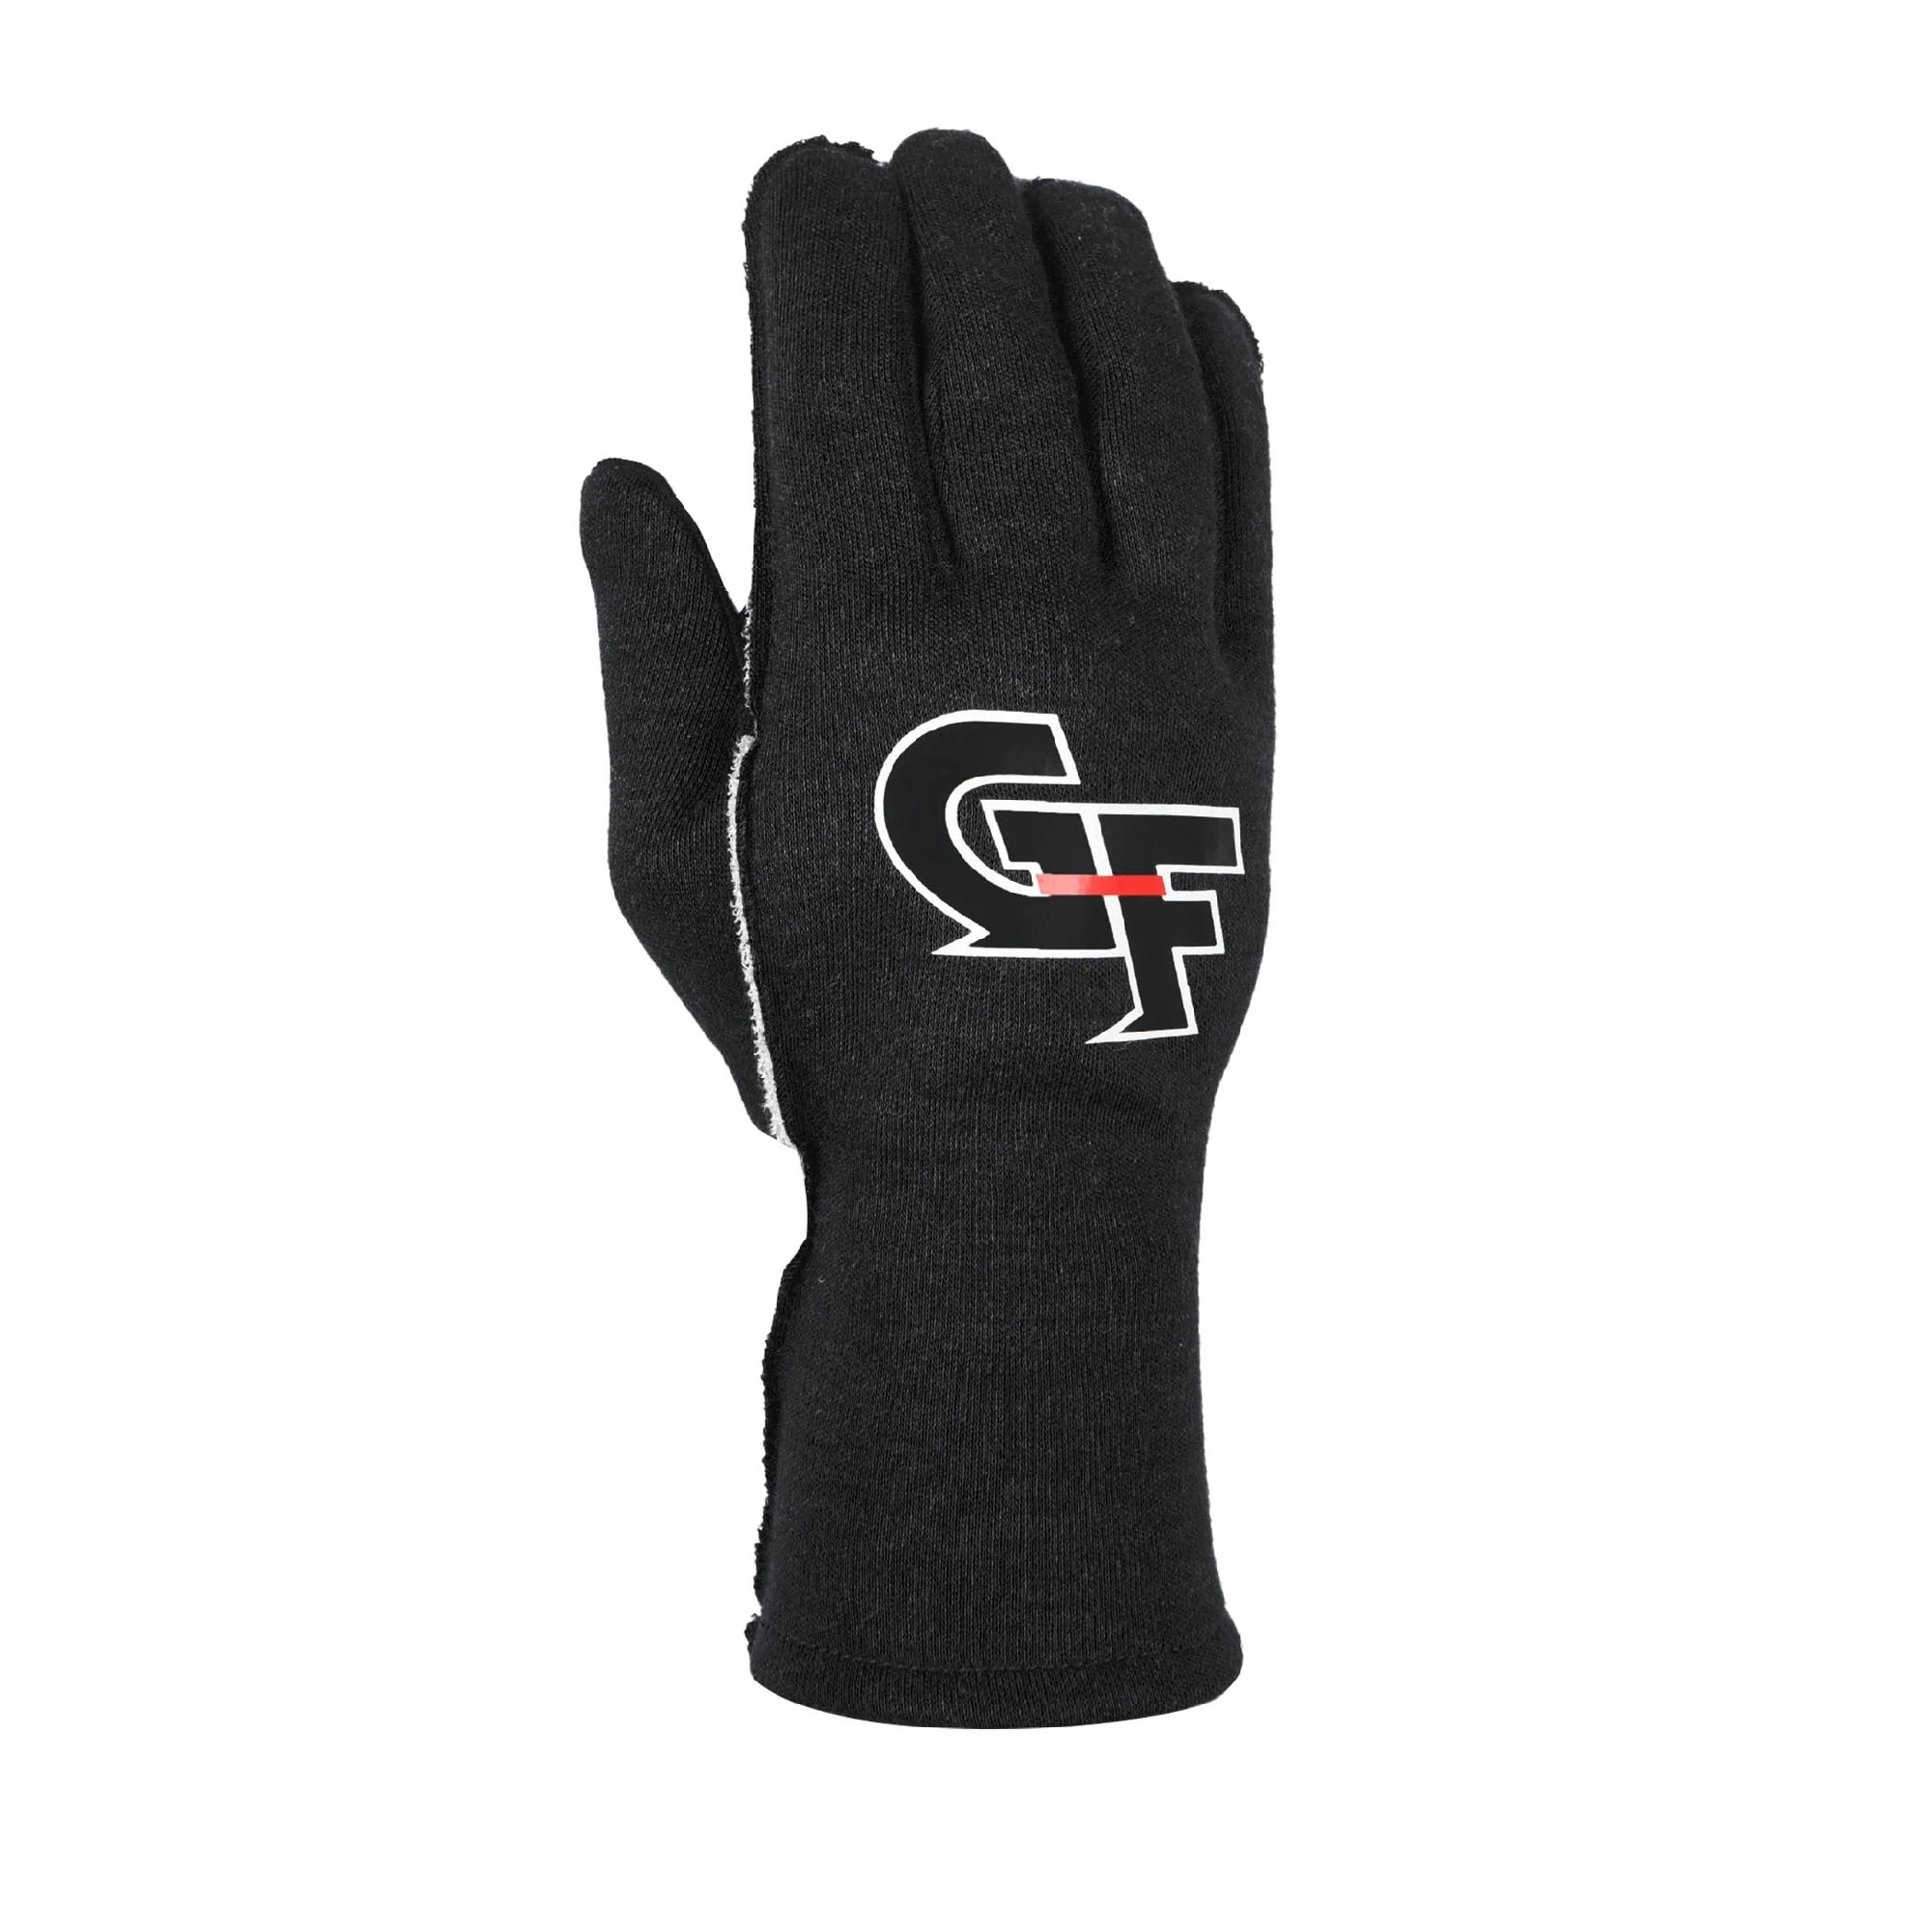 G-FORCE Gloves G-Limit Youth Small Black